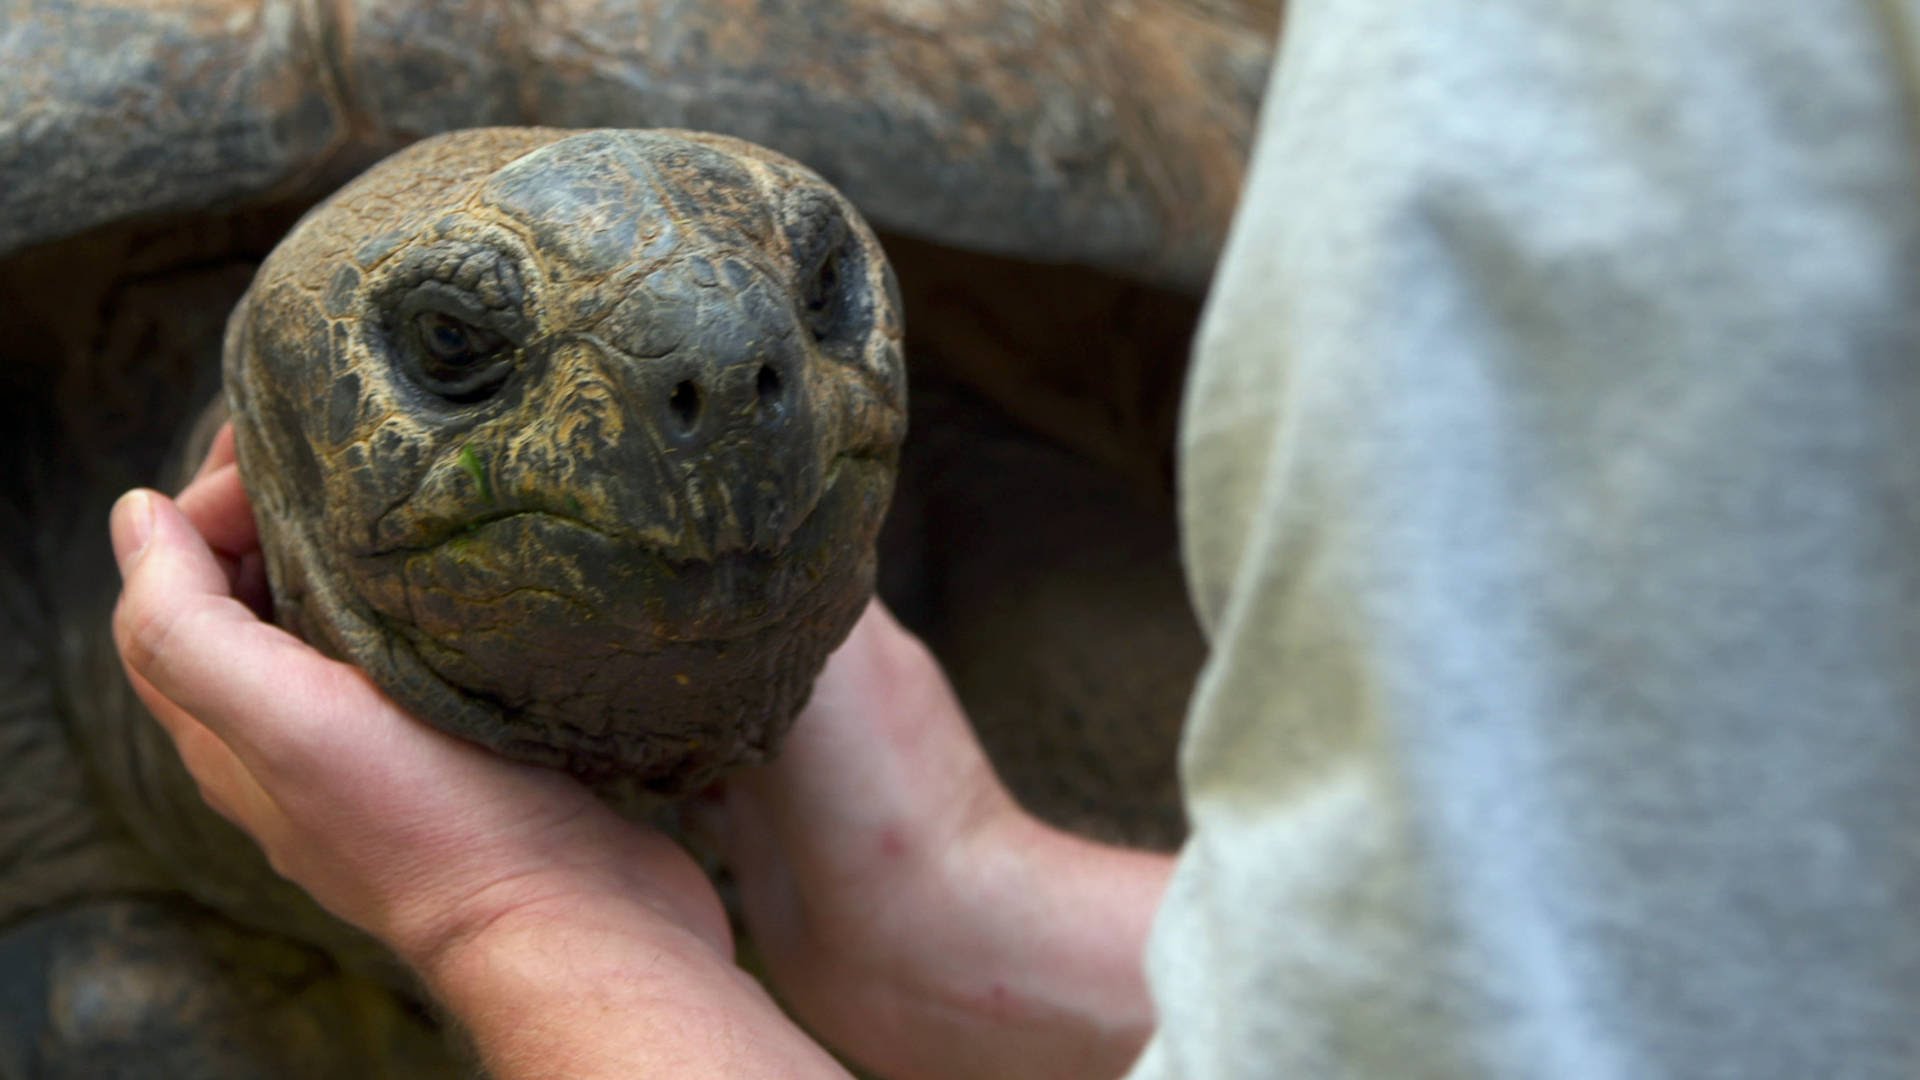 Can tortoises show affection